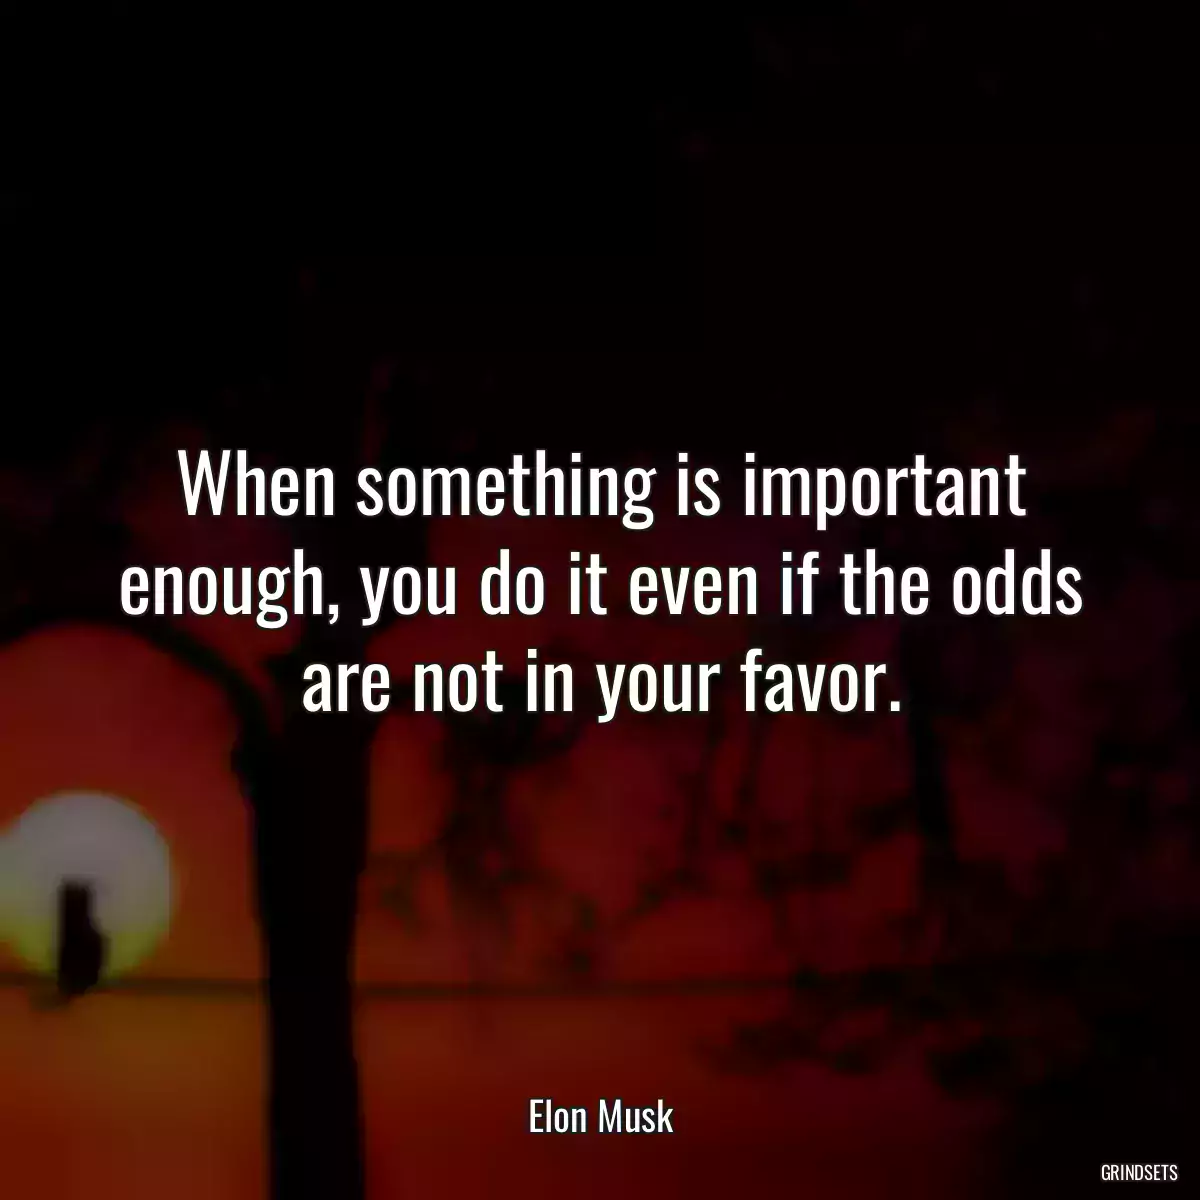 When something is important enough, you do it even if the odds are not in your favor.